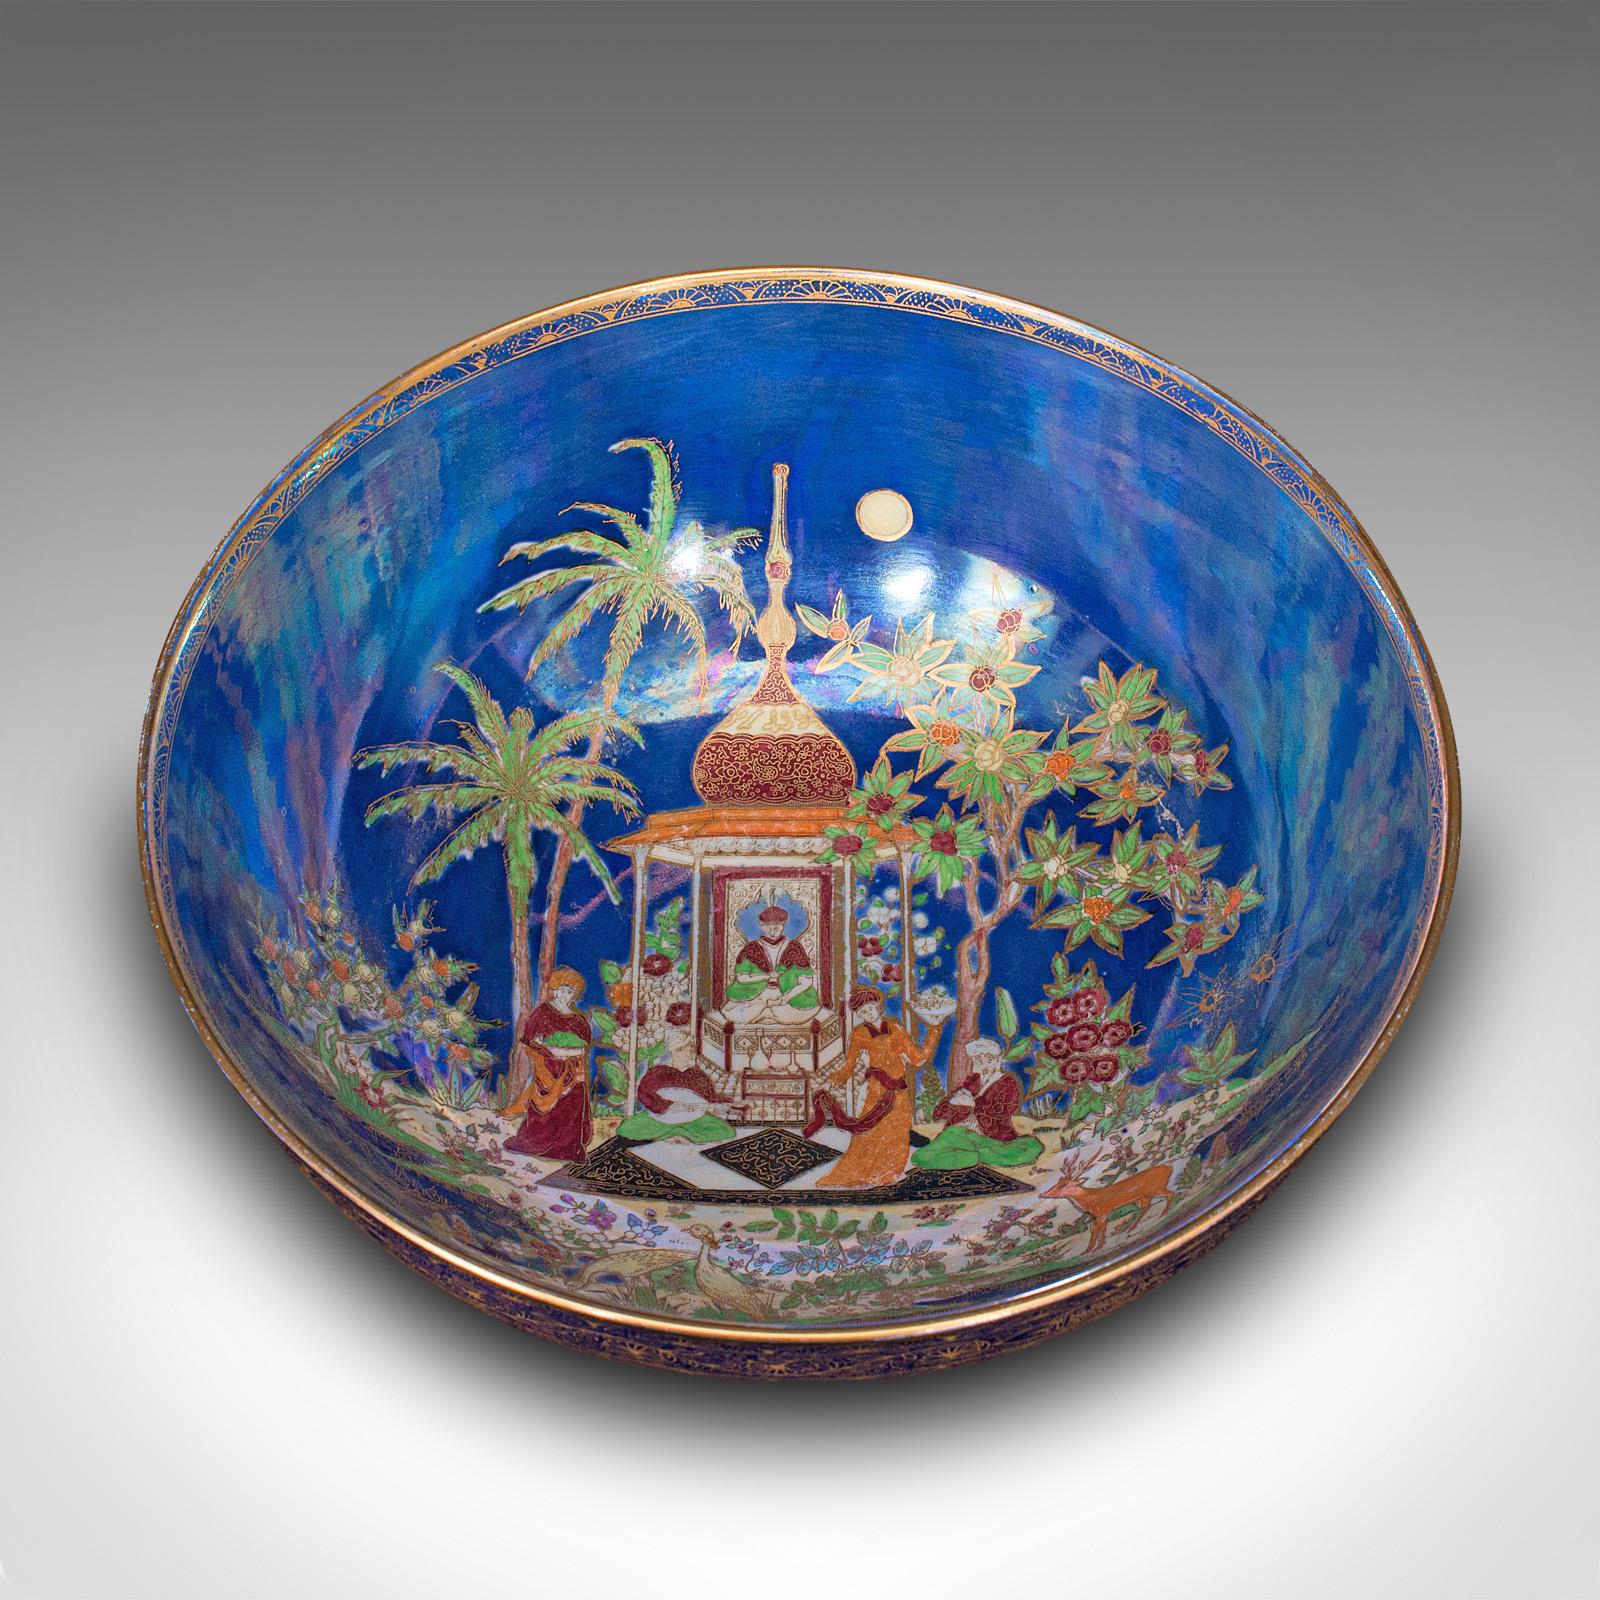 This is an antique decorative fruit bowl. An English, ceramic and lustre finish serving dish, dating to the early 20th century, circa 1920.

Striking colour and distinctive Carlton Ware Persian pattern appeal
Displays a desirable aged patina and